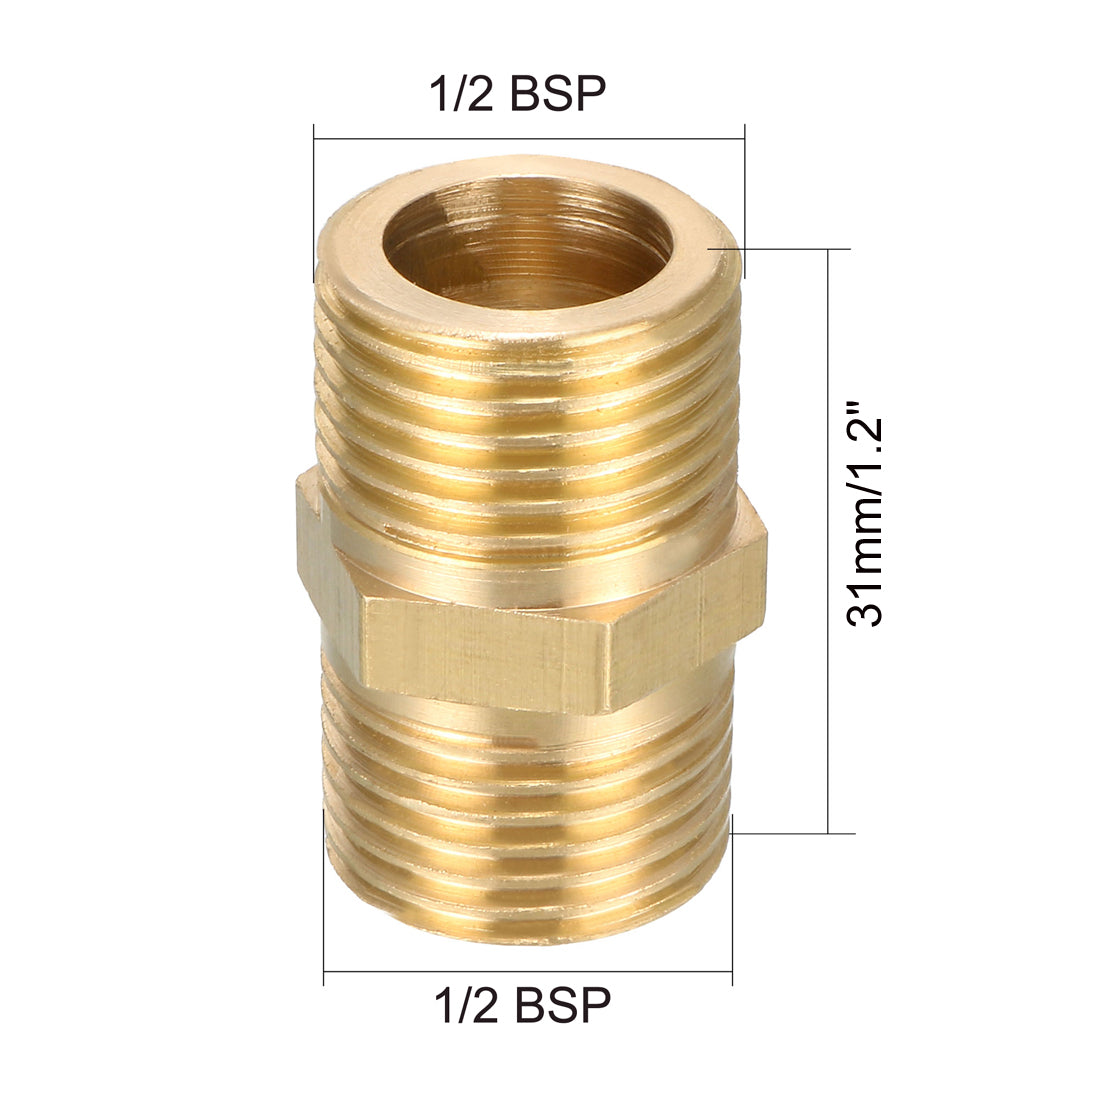 uxcell Uxcell Brass Pipe Fitting Hex Bushing 1/2 BSP Male x 1/2 BSP Male Thread Connector 5pcs